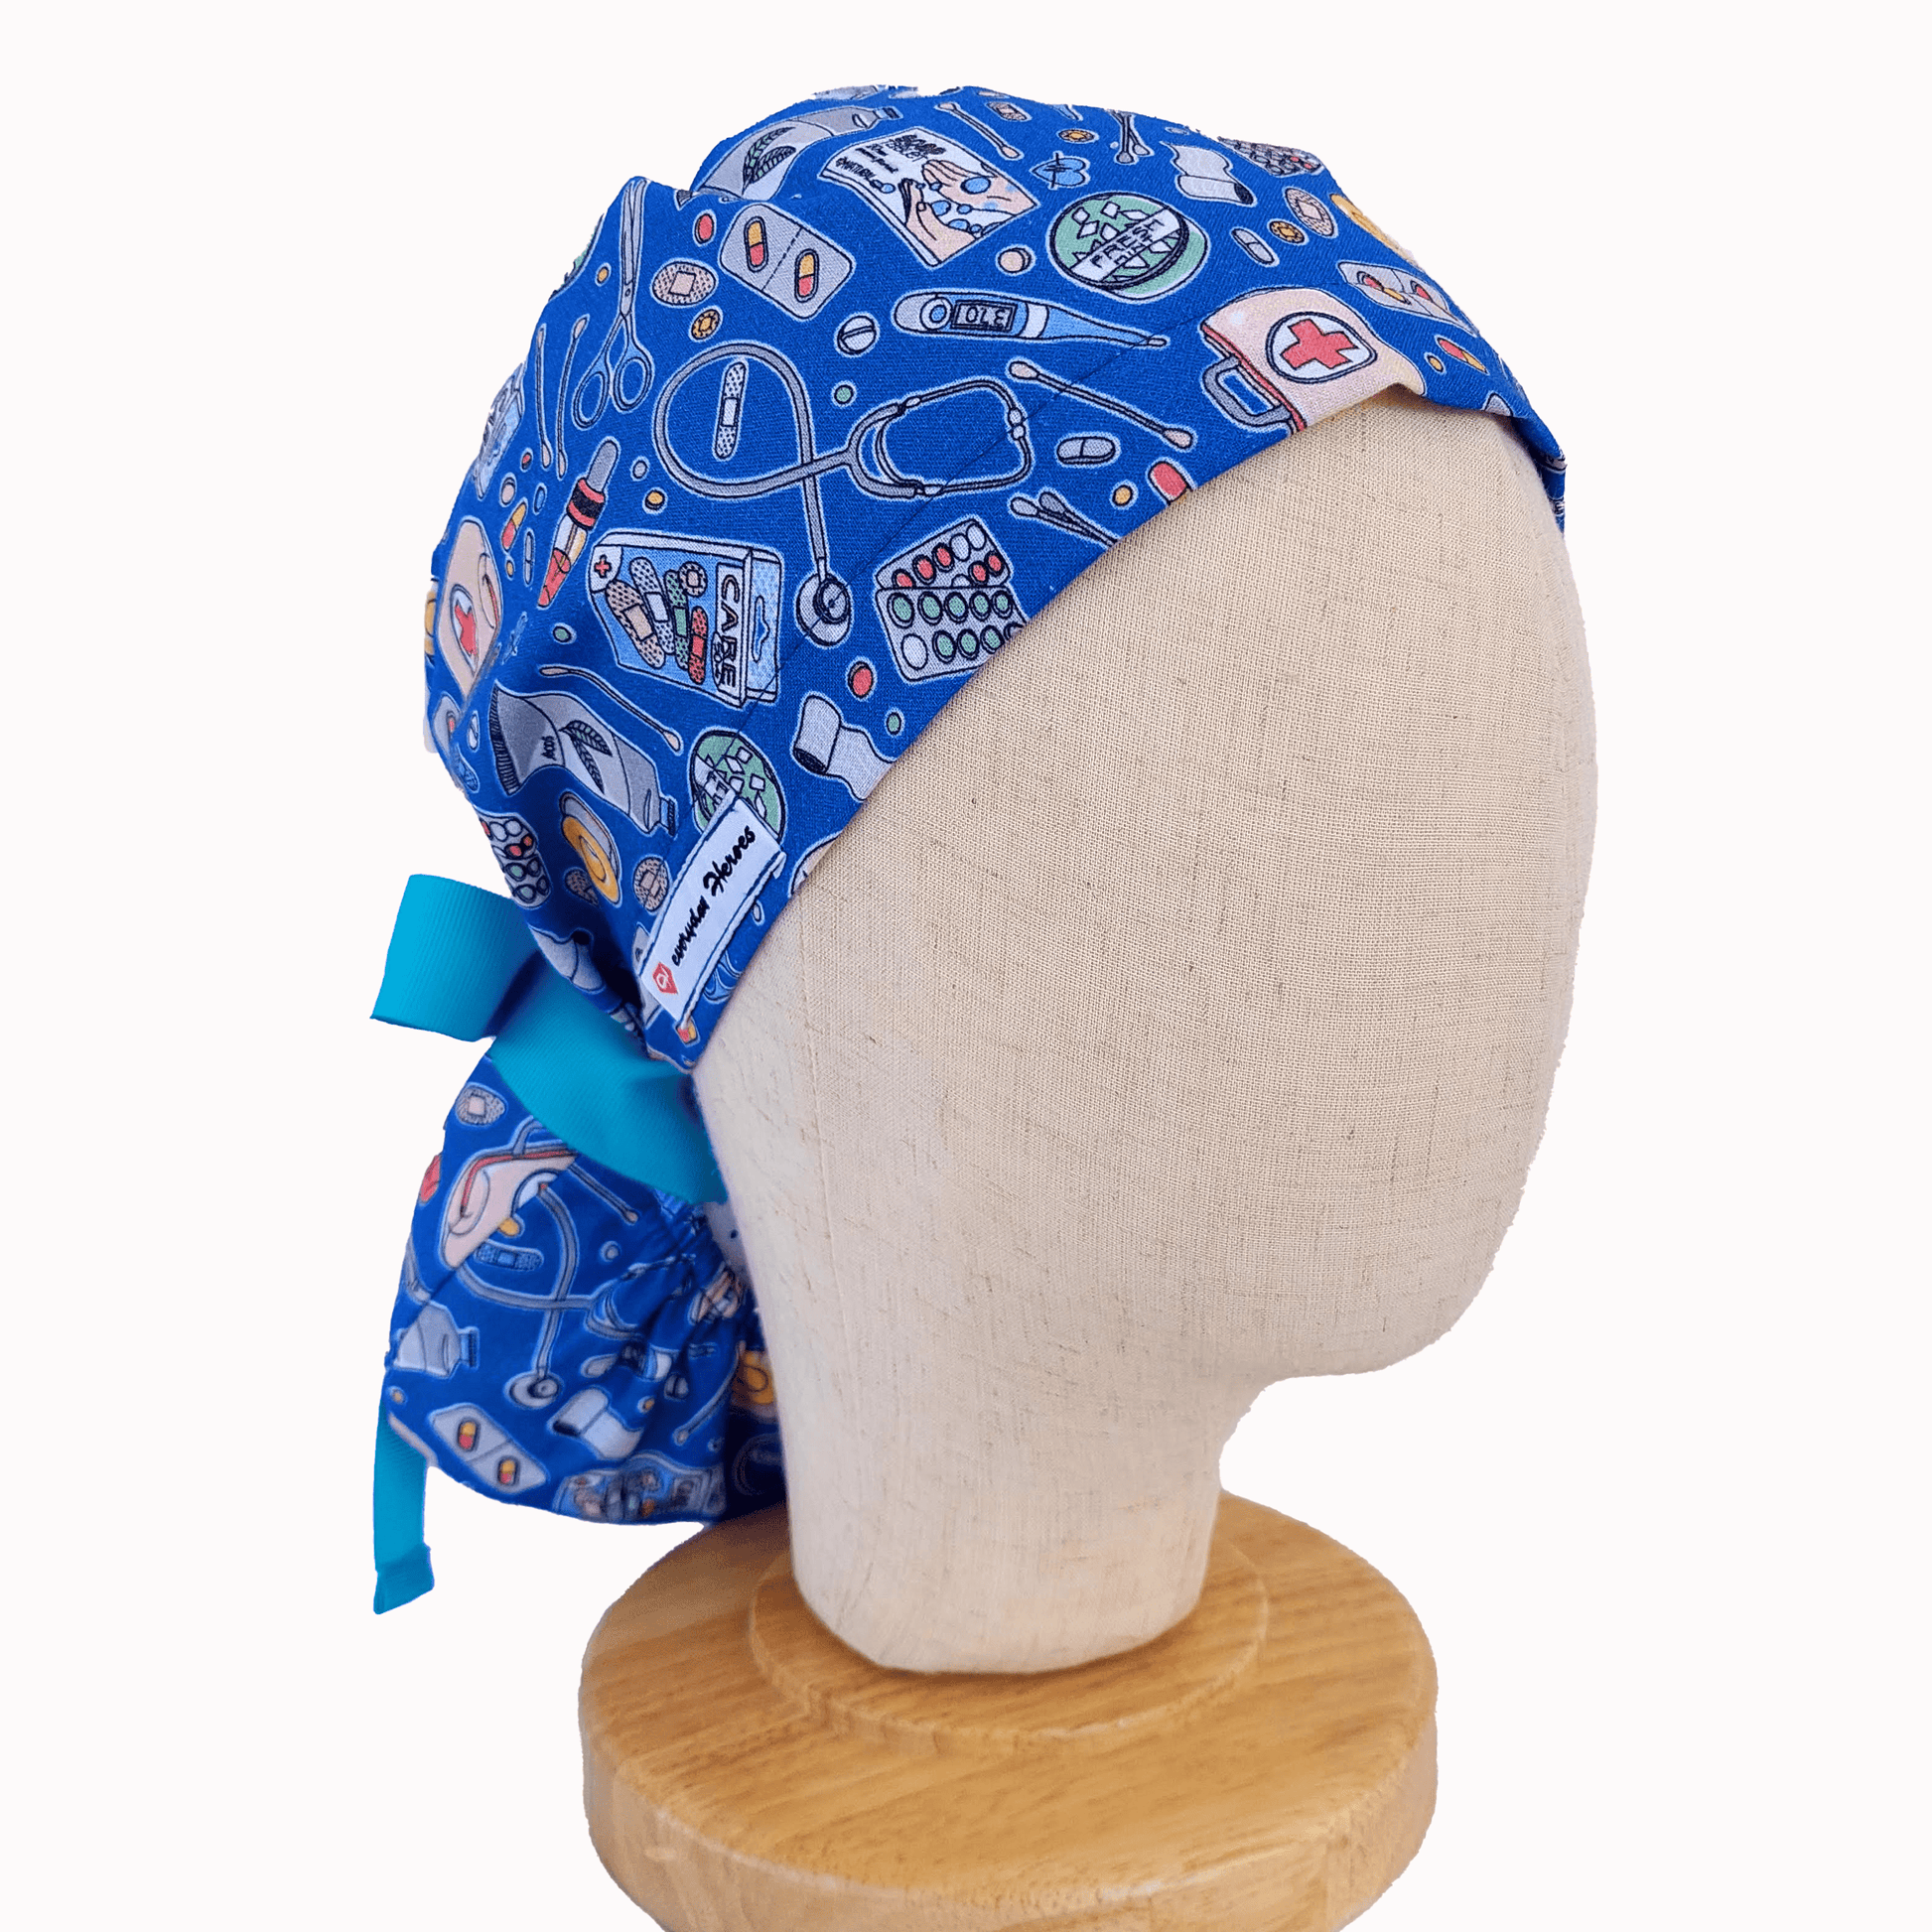 Heartbeat Surgical Scrub Cap for Ponytails - Professional Scrub Hat